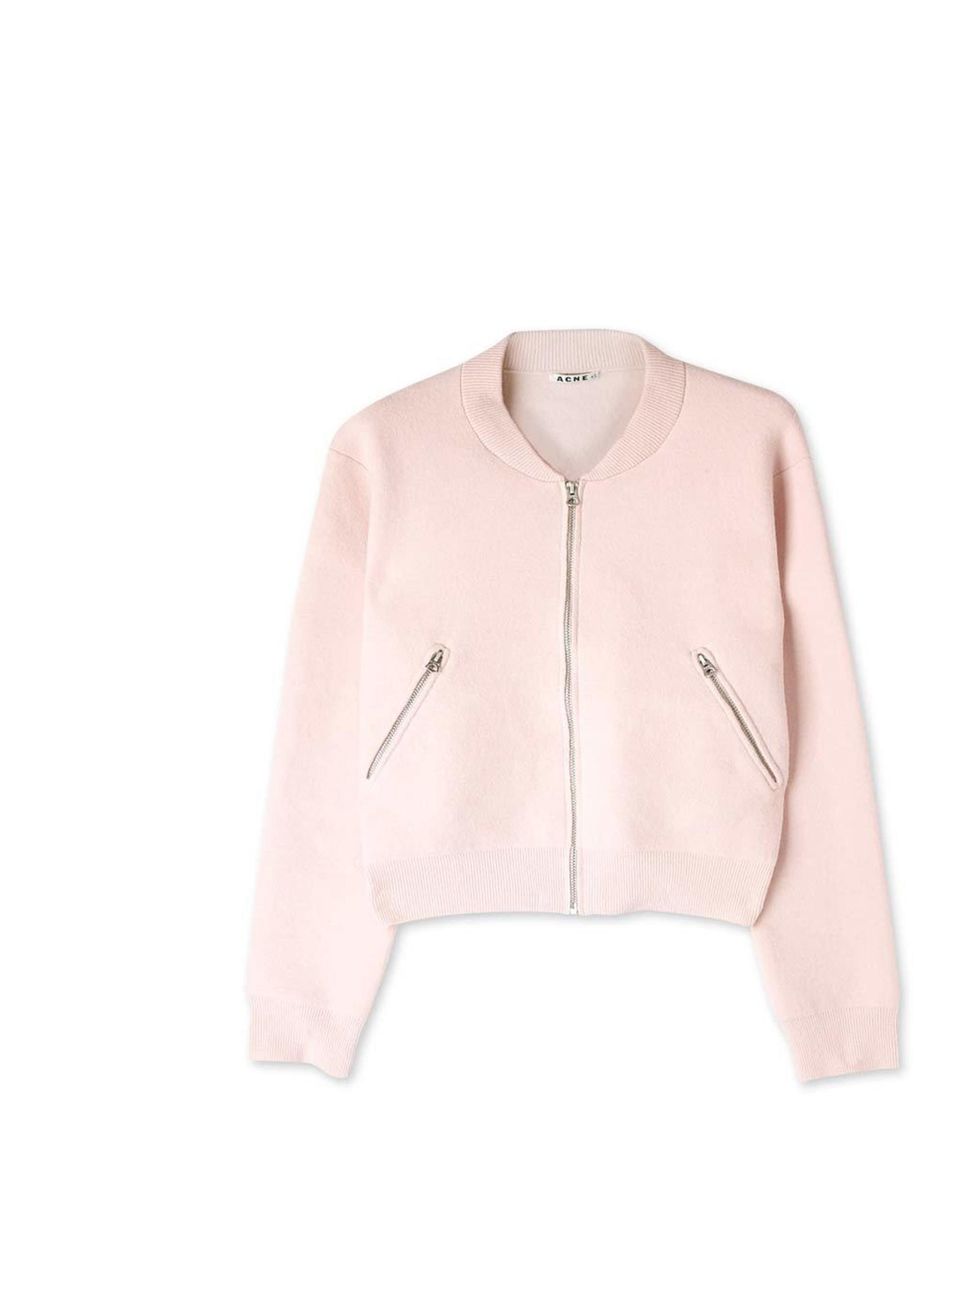 <p>A sporty style with a sleek finish - this pastel bomber jacket will inject a little springtime optimism into grey days.</p><p>Acne jacket, £400 at <a href="http://www.my-wardrobe.com/acne/olympia-cropped-bomber-cardigan-350031">My-Wardrobe.com</a></p>